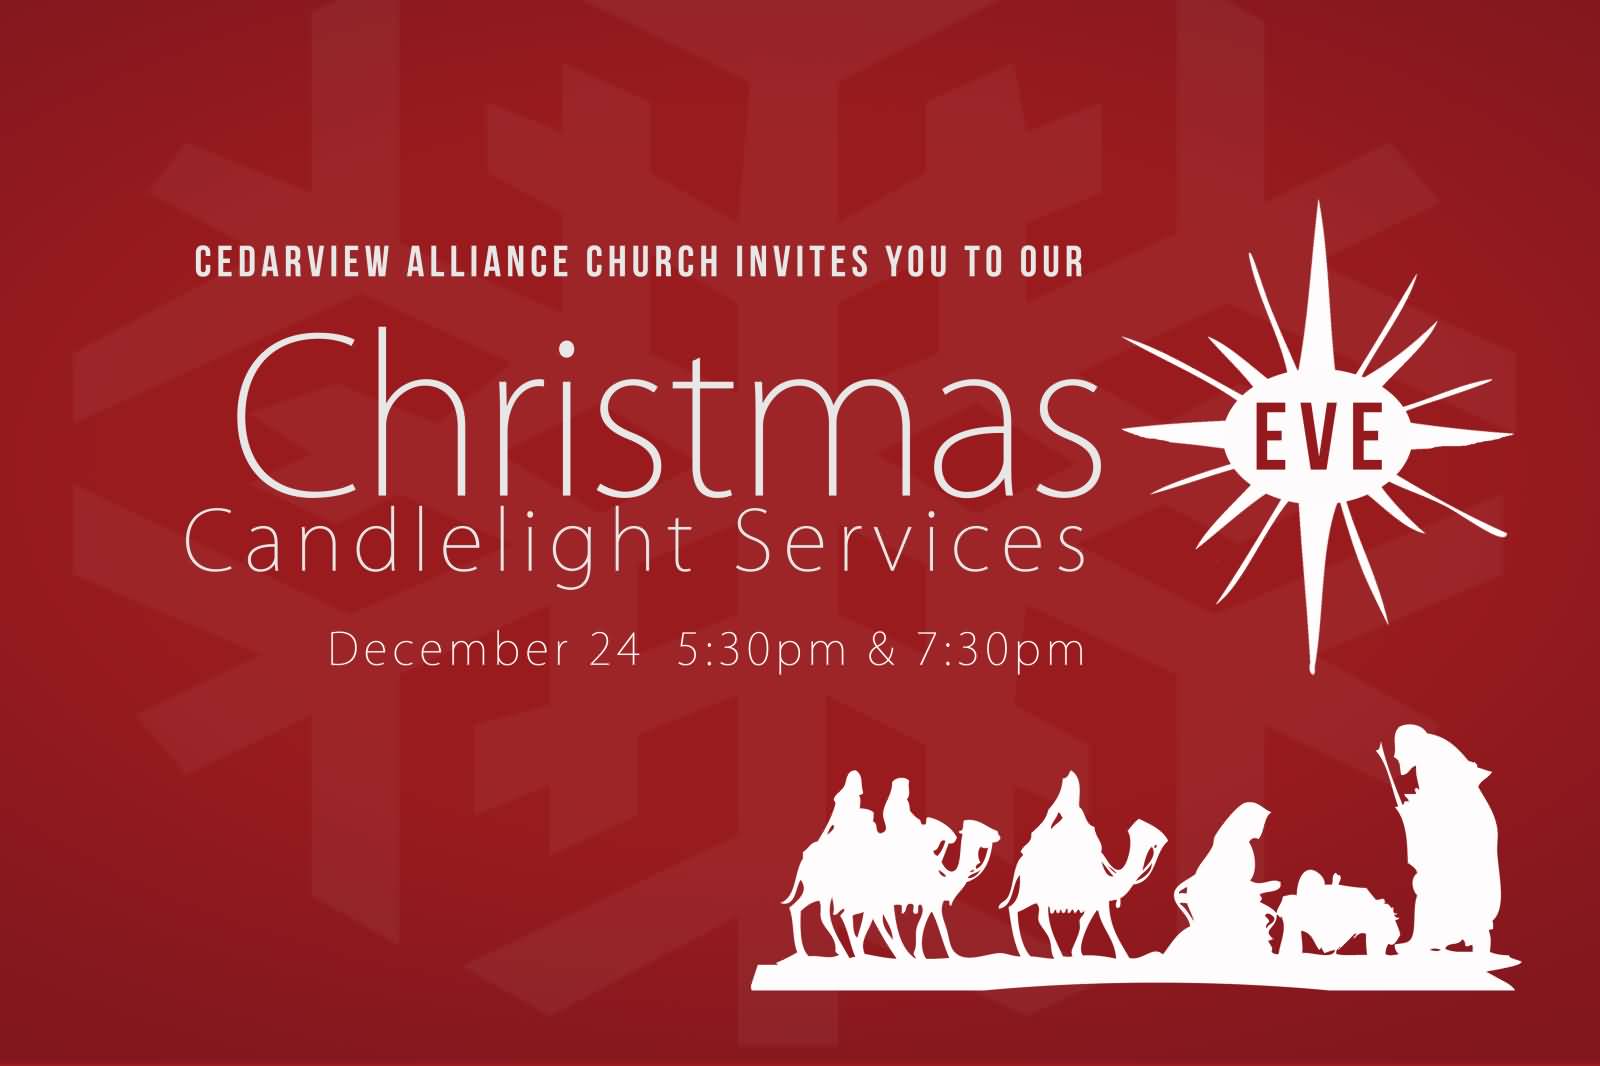 Christmas Eve Candlelight Services Invitation